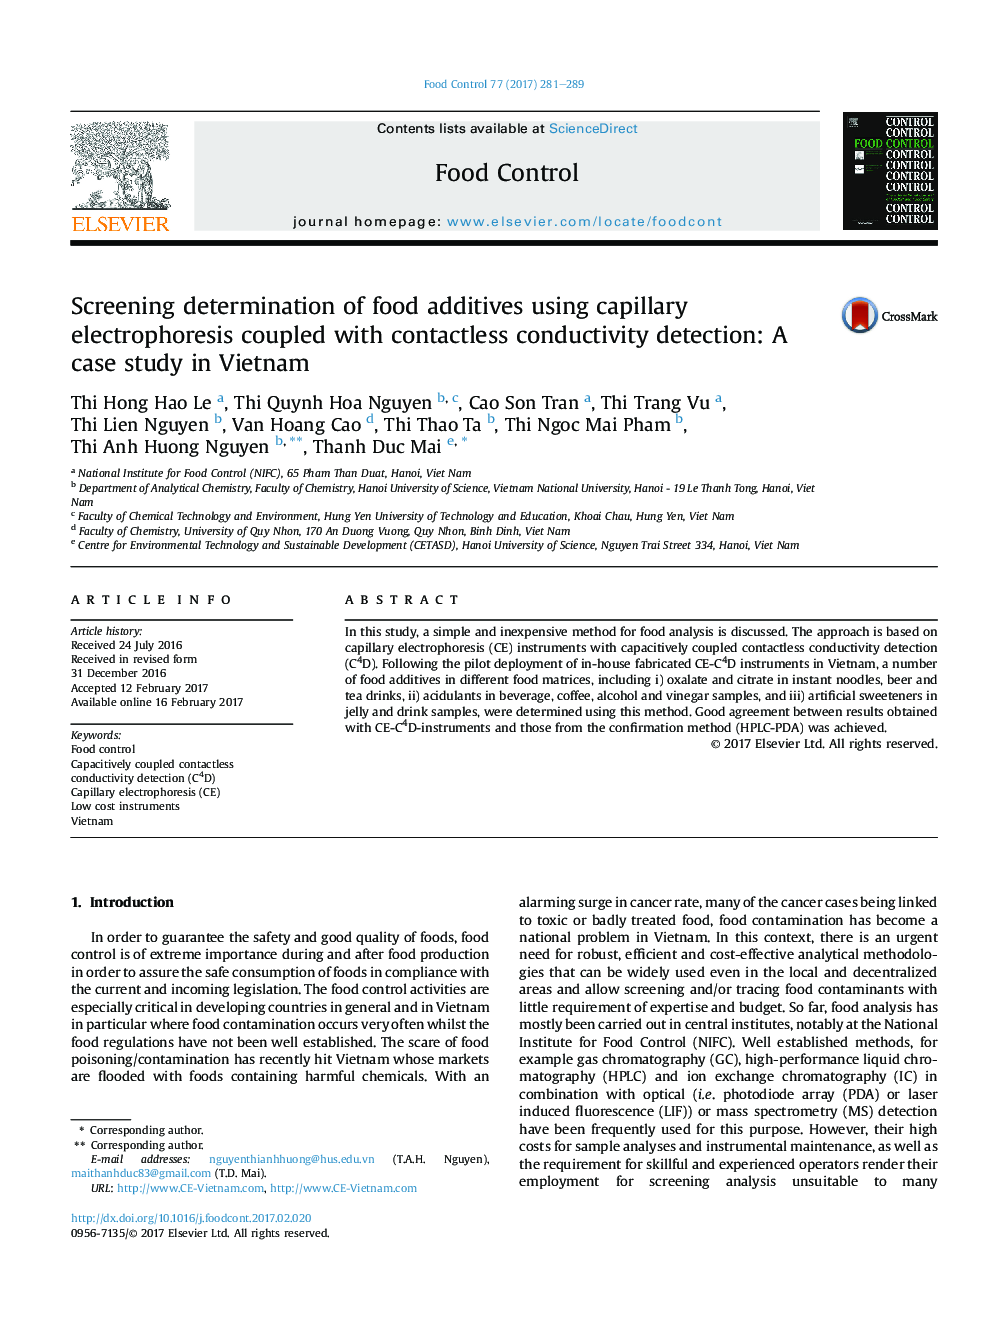 Screening determination of food additives using capillary electrophoresis coupled with contactless conductivity detection: A case study in Vietnam